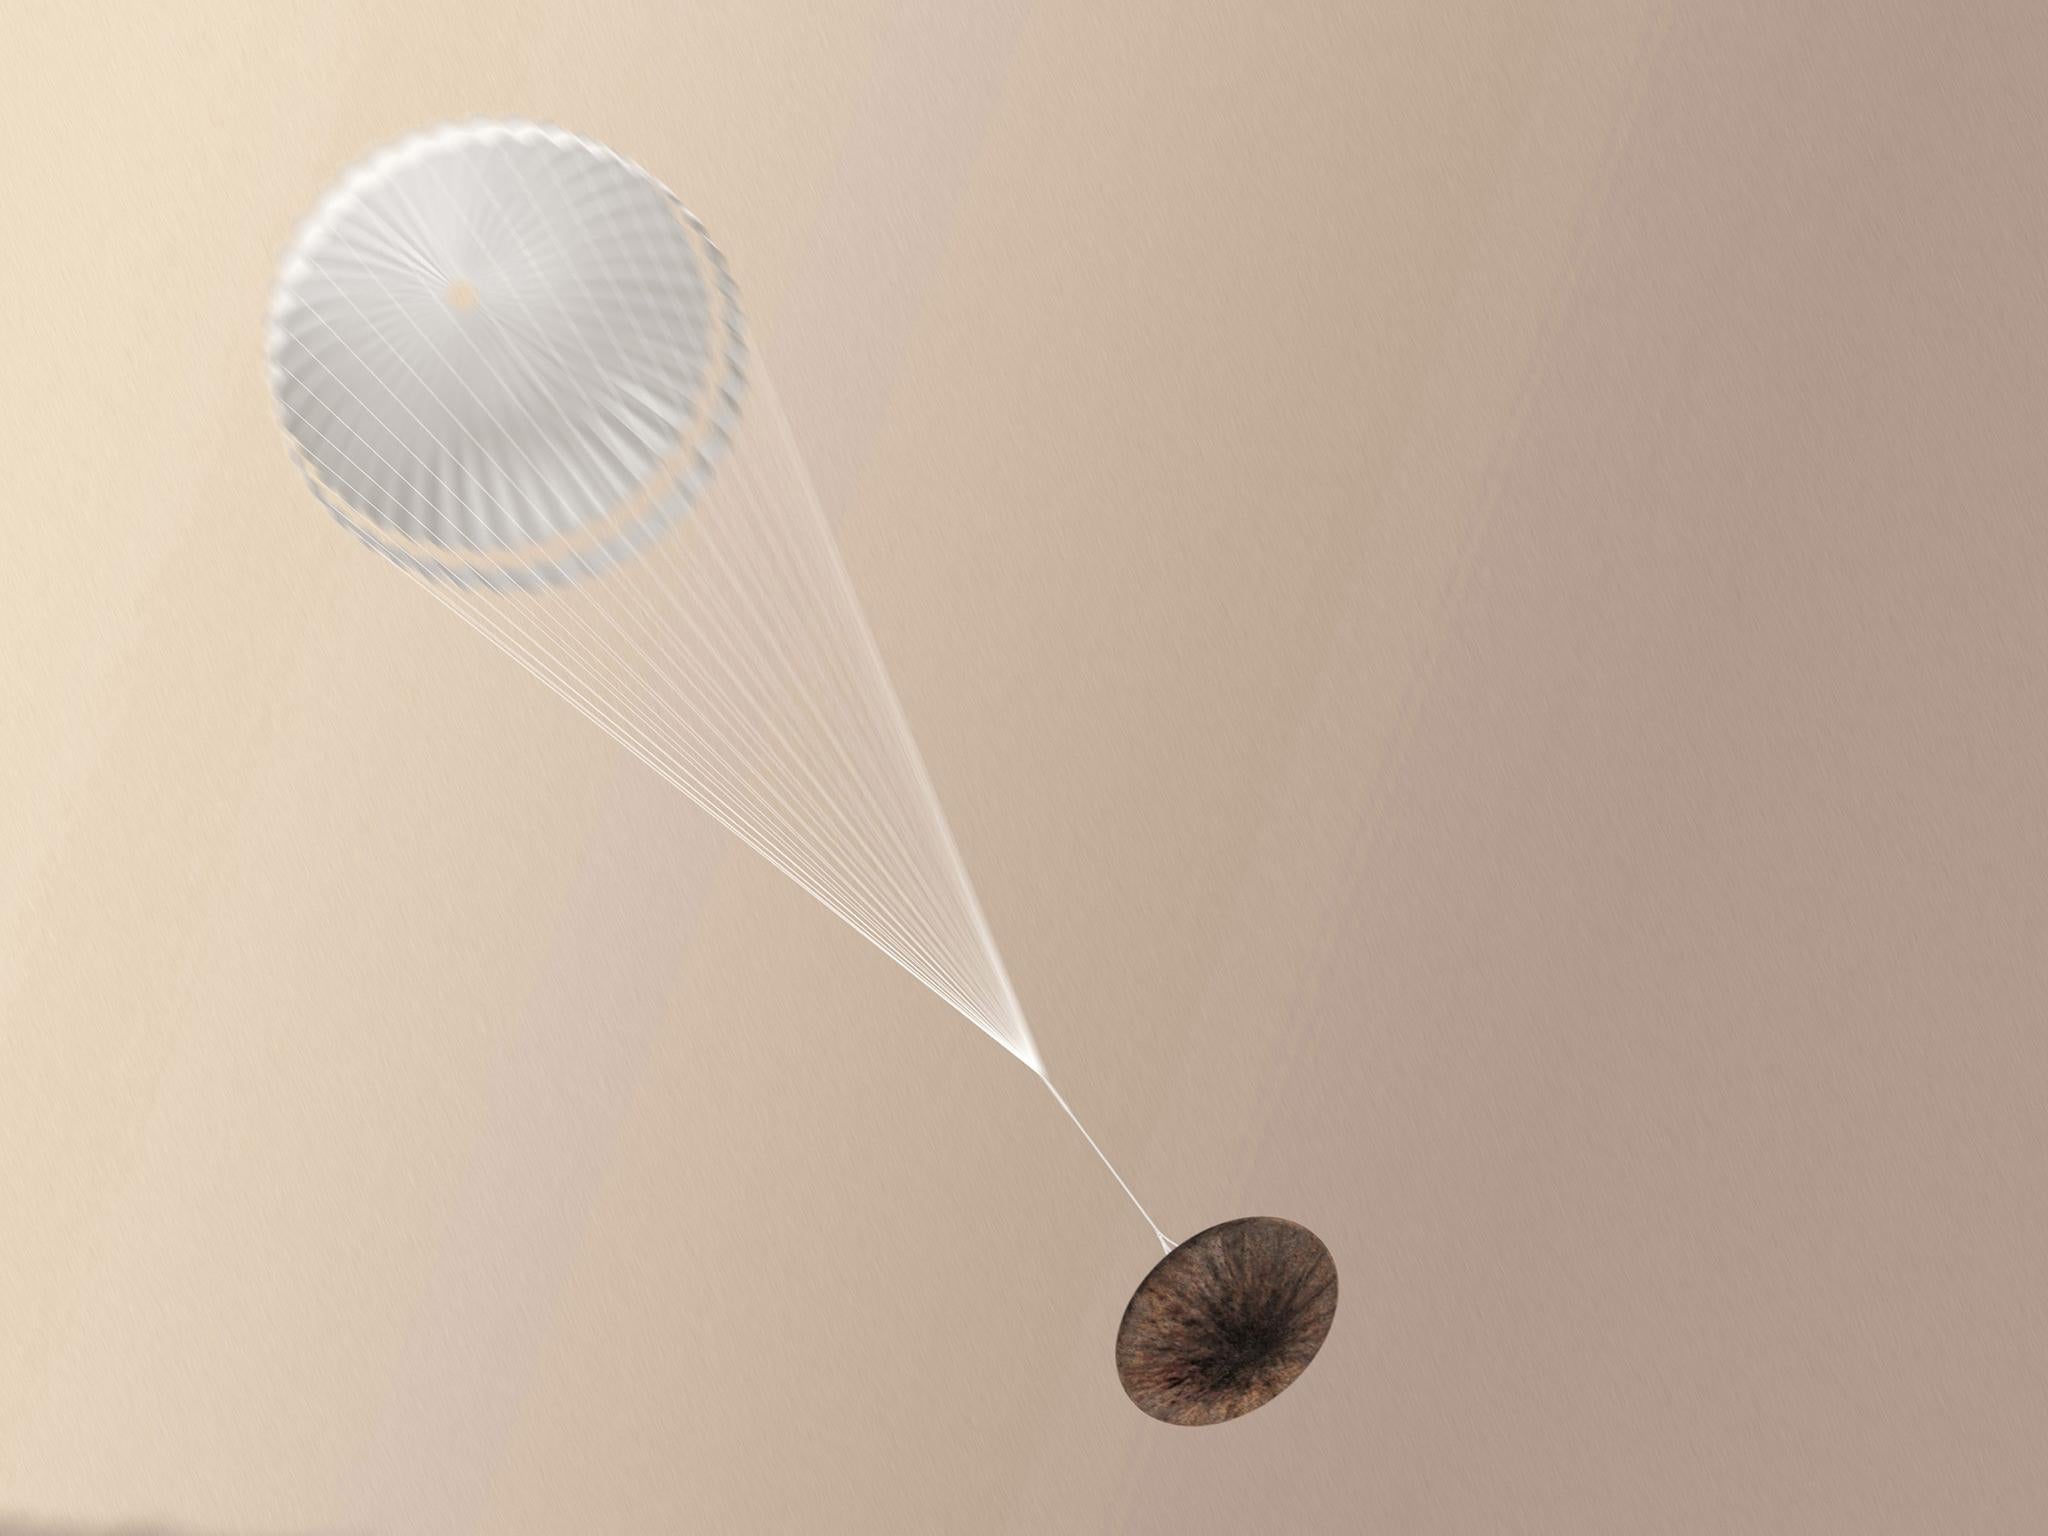 European Space Agency (ESA),based at Darmstadt, Germany showing the Schiaparelli module after the parachute has been deployed. ESA report on 20 October 2016 that essential data from the ExoMars Schiaparelli lander sent to its mothership Trace Gas Orbiter during the moduleís descent to the Red Planetís surface